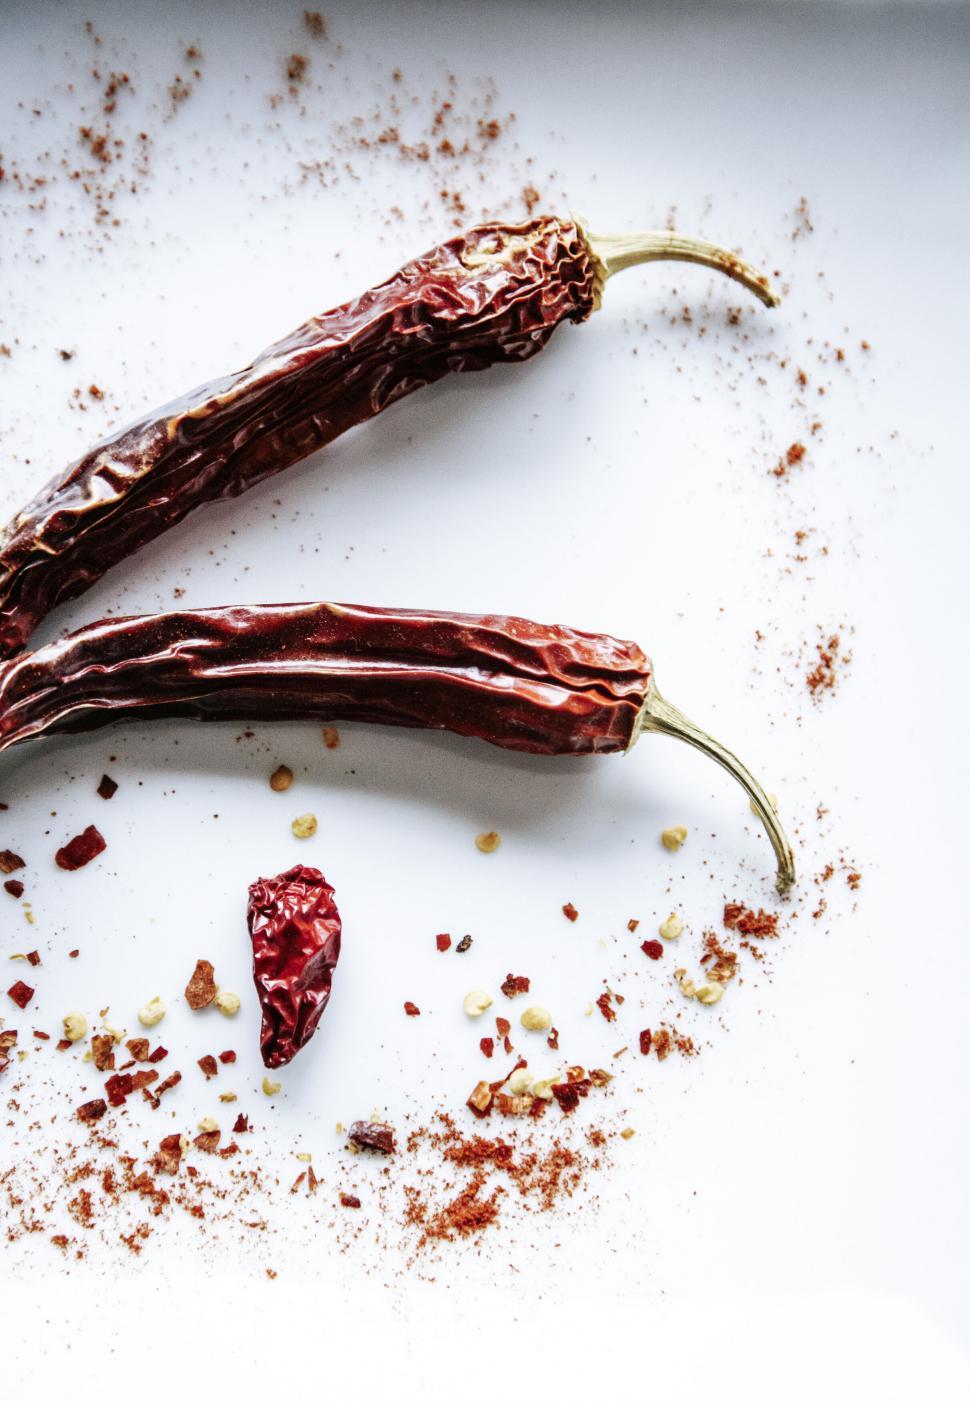 Free Image of Red chili peppers on a white background 